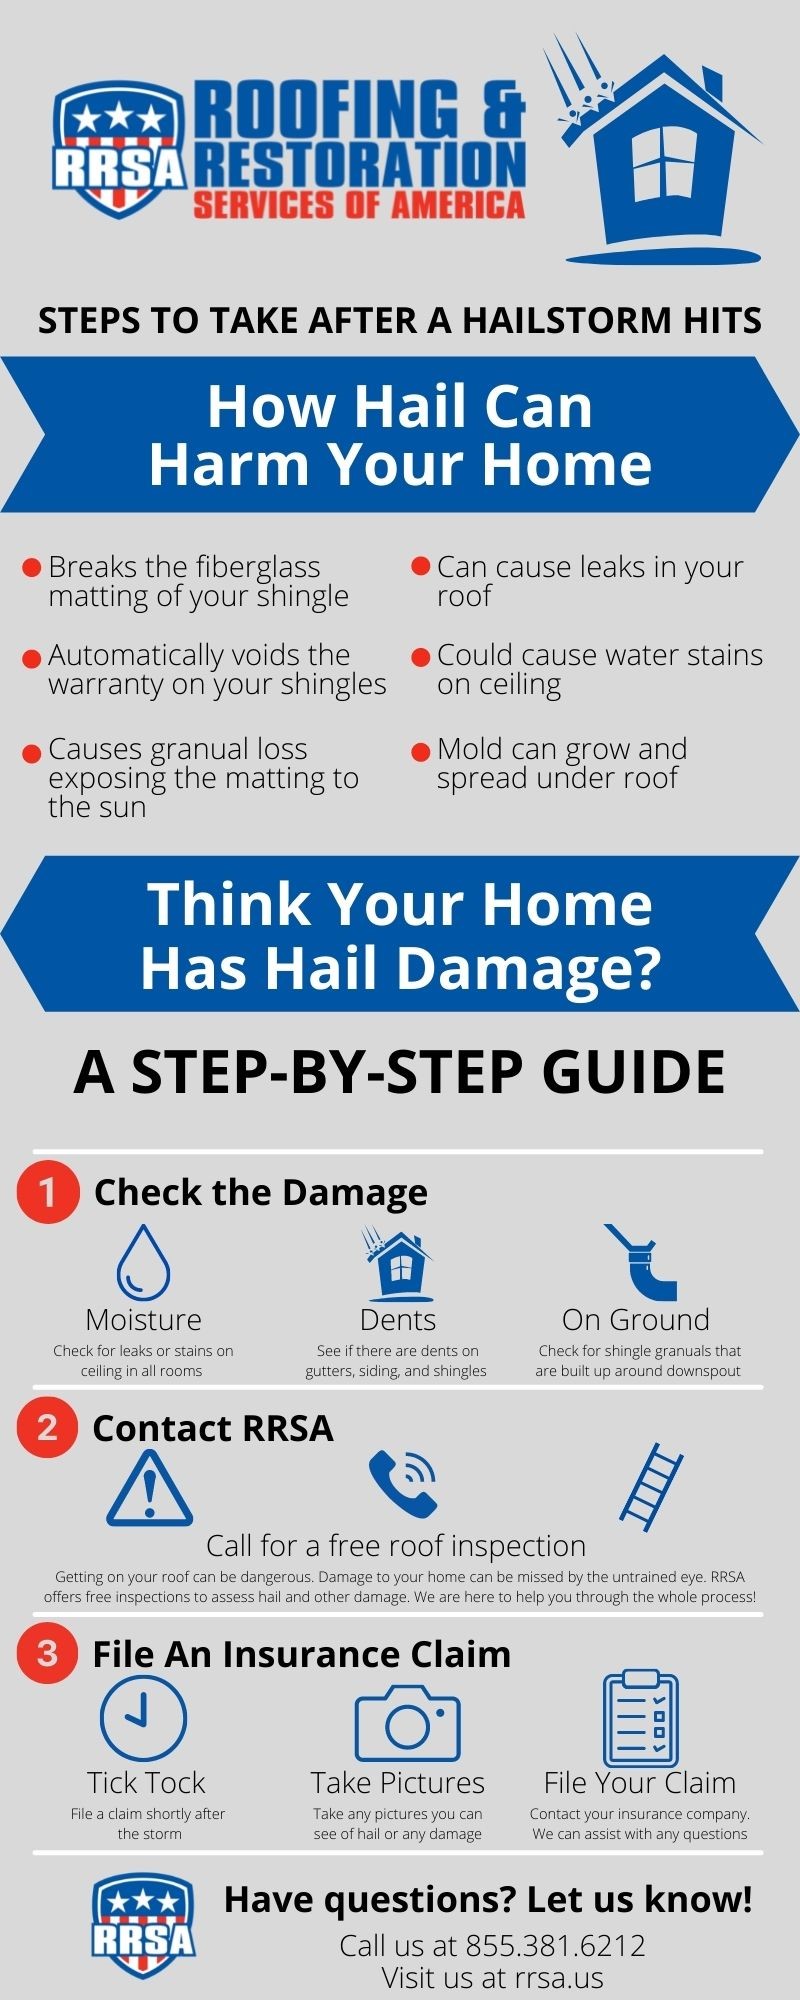 Steps to Take After a Hailstorm Hits